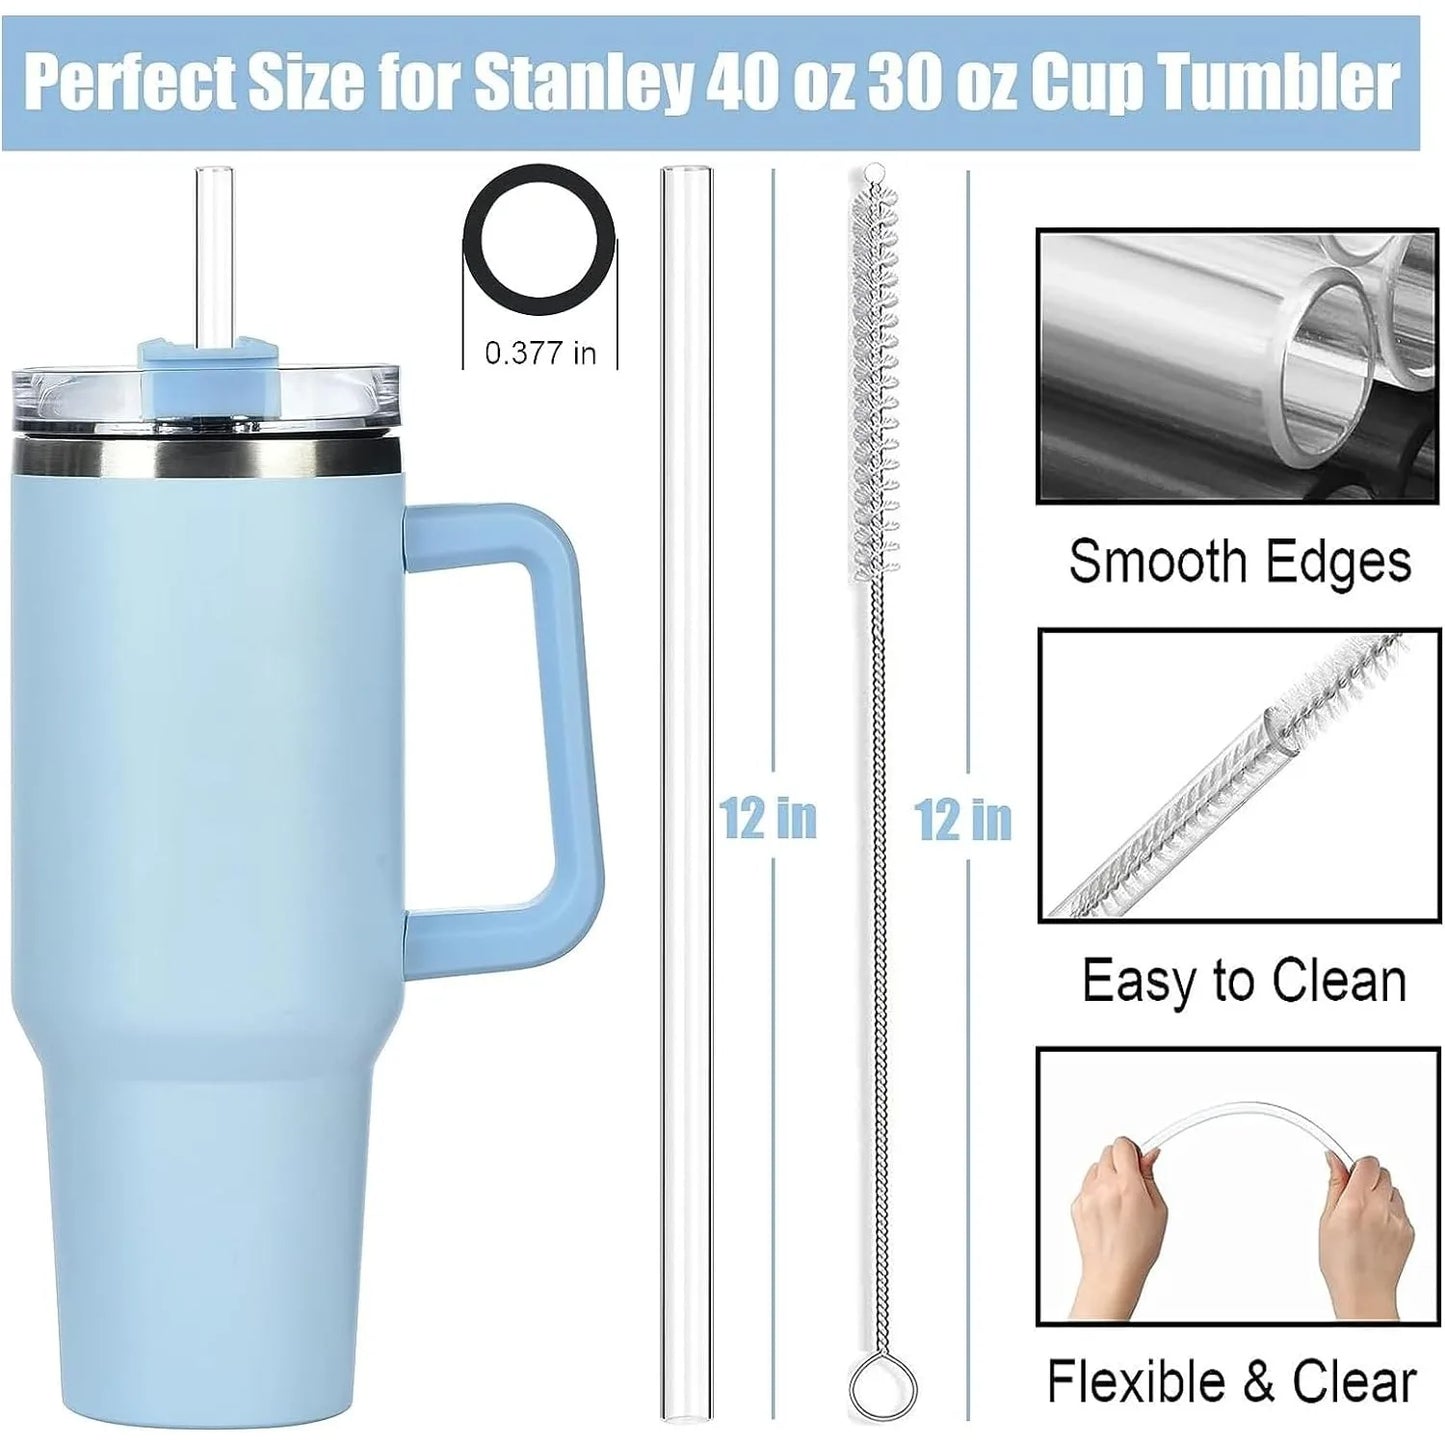 12pcs Replacement Straws for 40 oz Stanley Tumbler Cup, Compatible with 40oz 30oz 20oz 14oz Tumblers